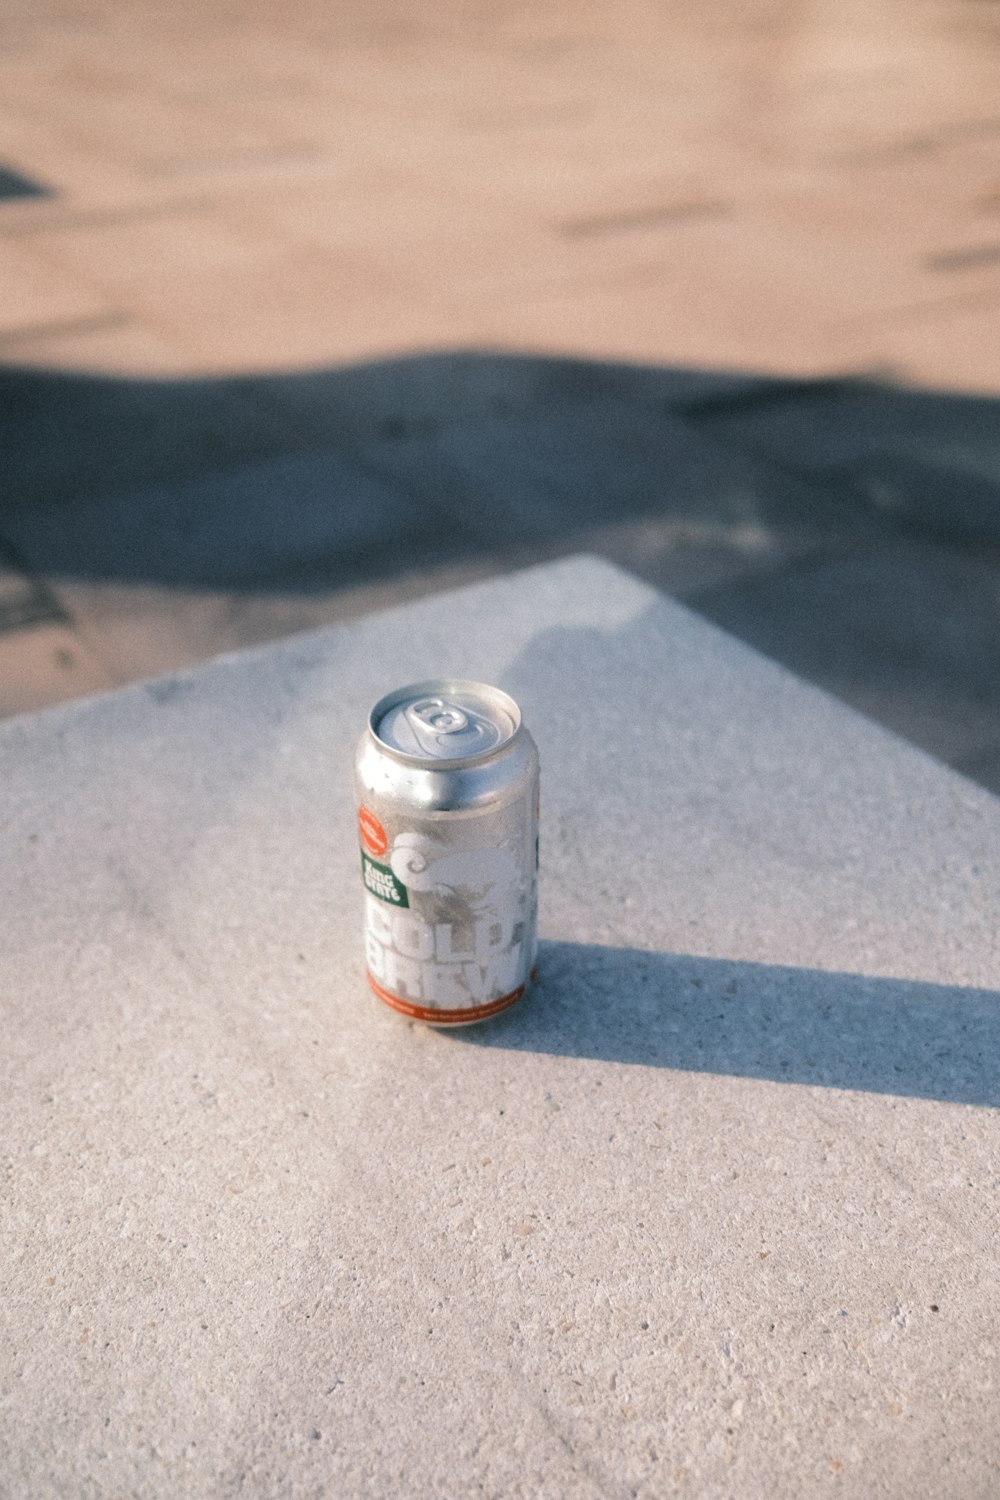 a can of soda sitting on the ground